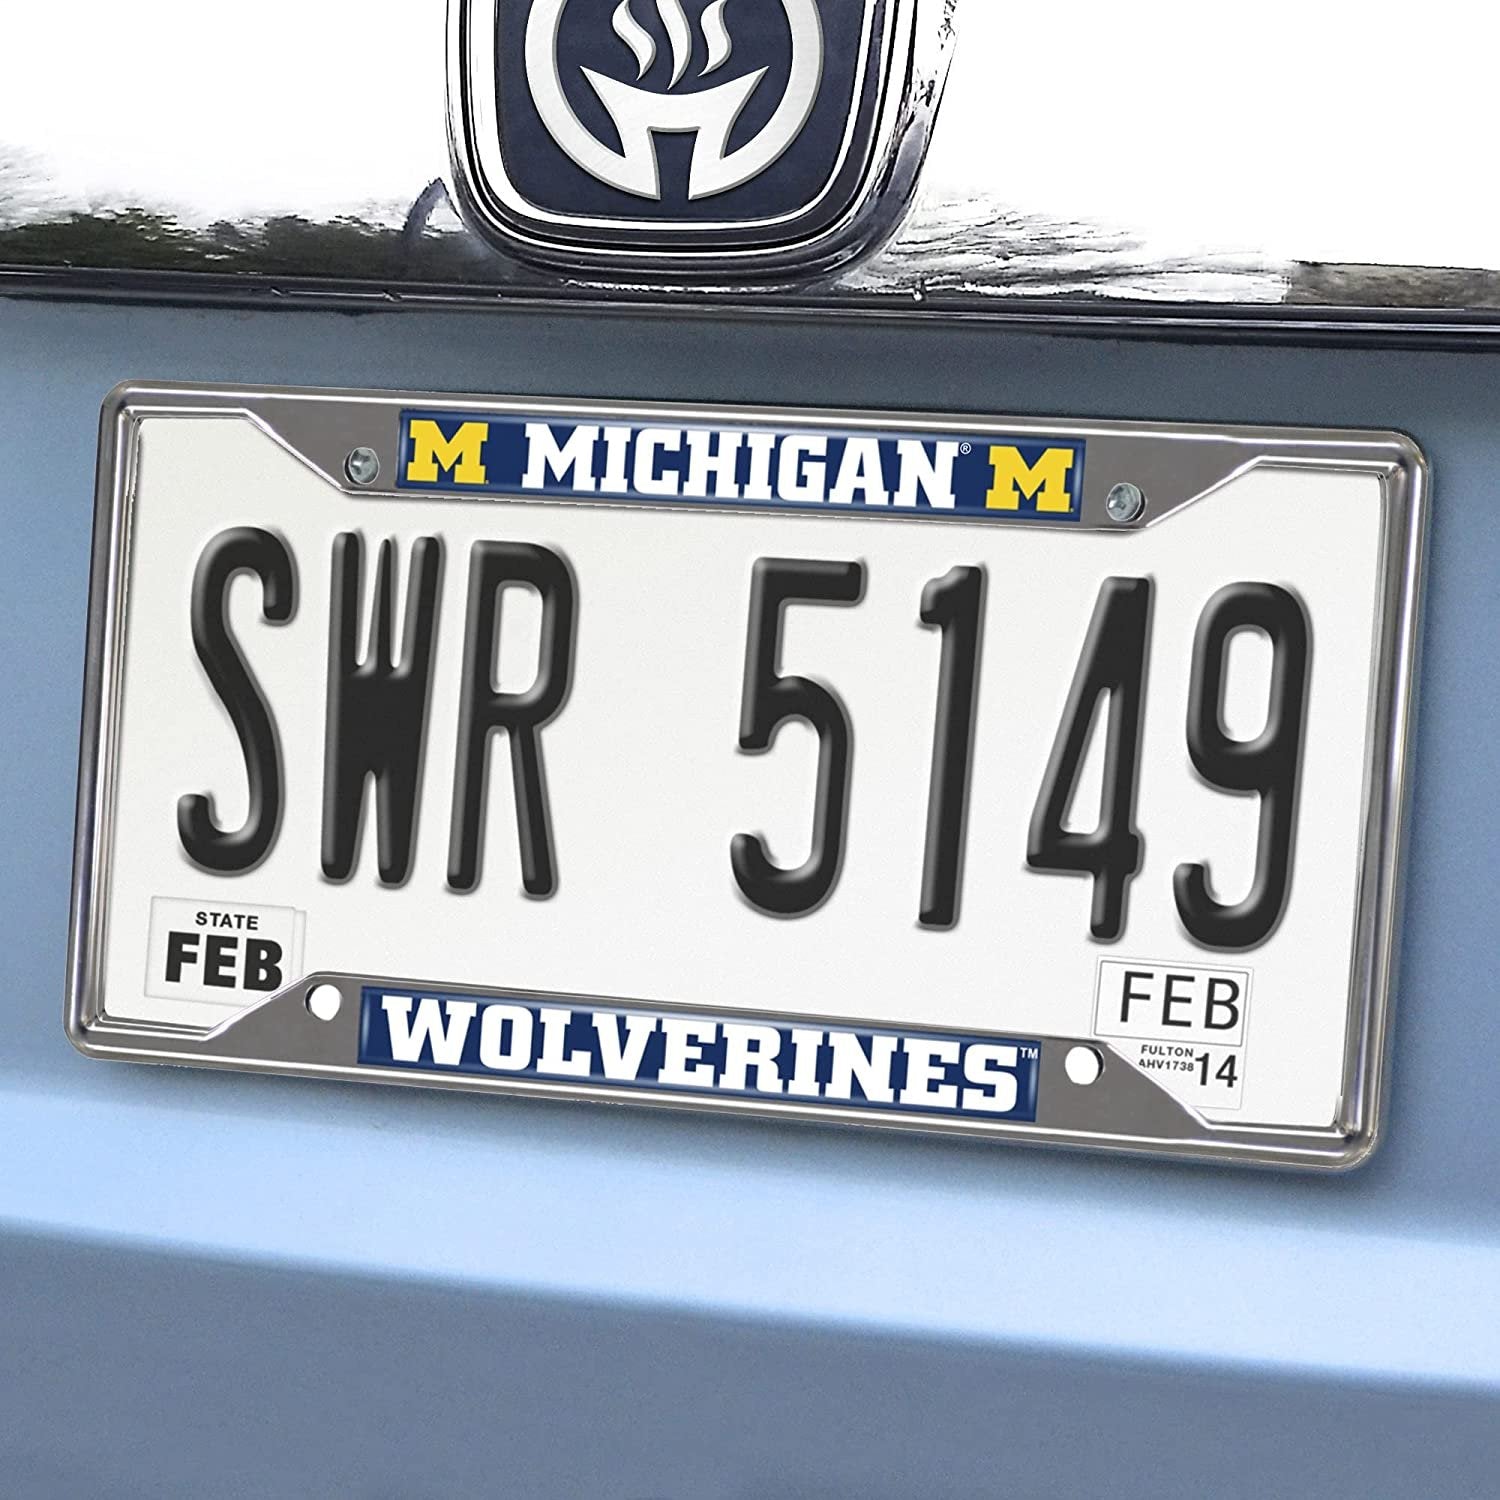 University of Michigan Wolverines Chrome Metal License Plate Frame Tag Cover